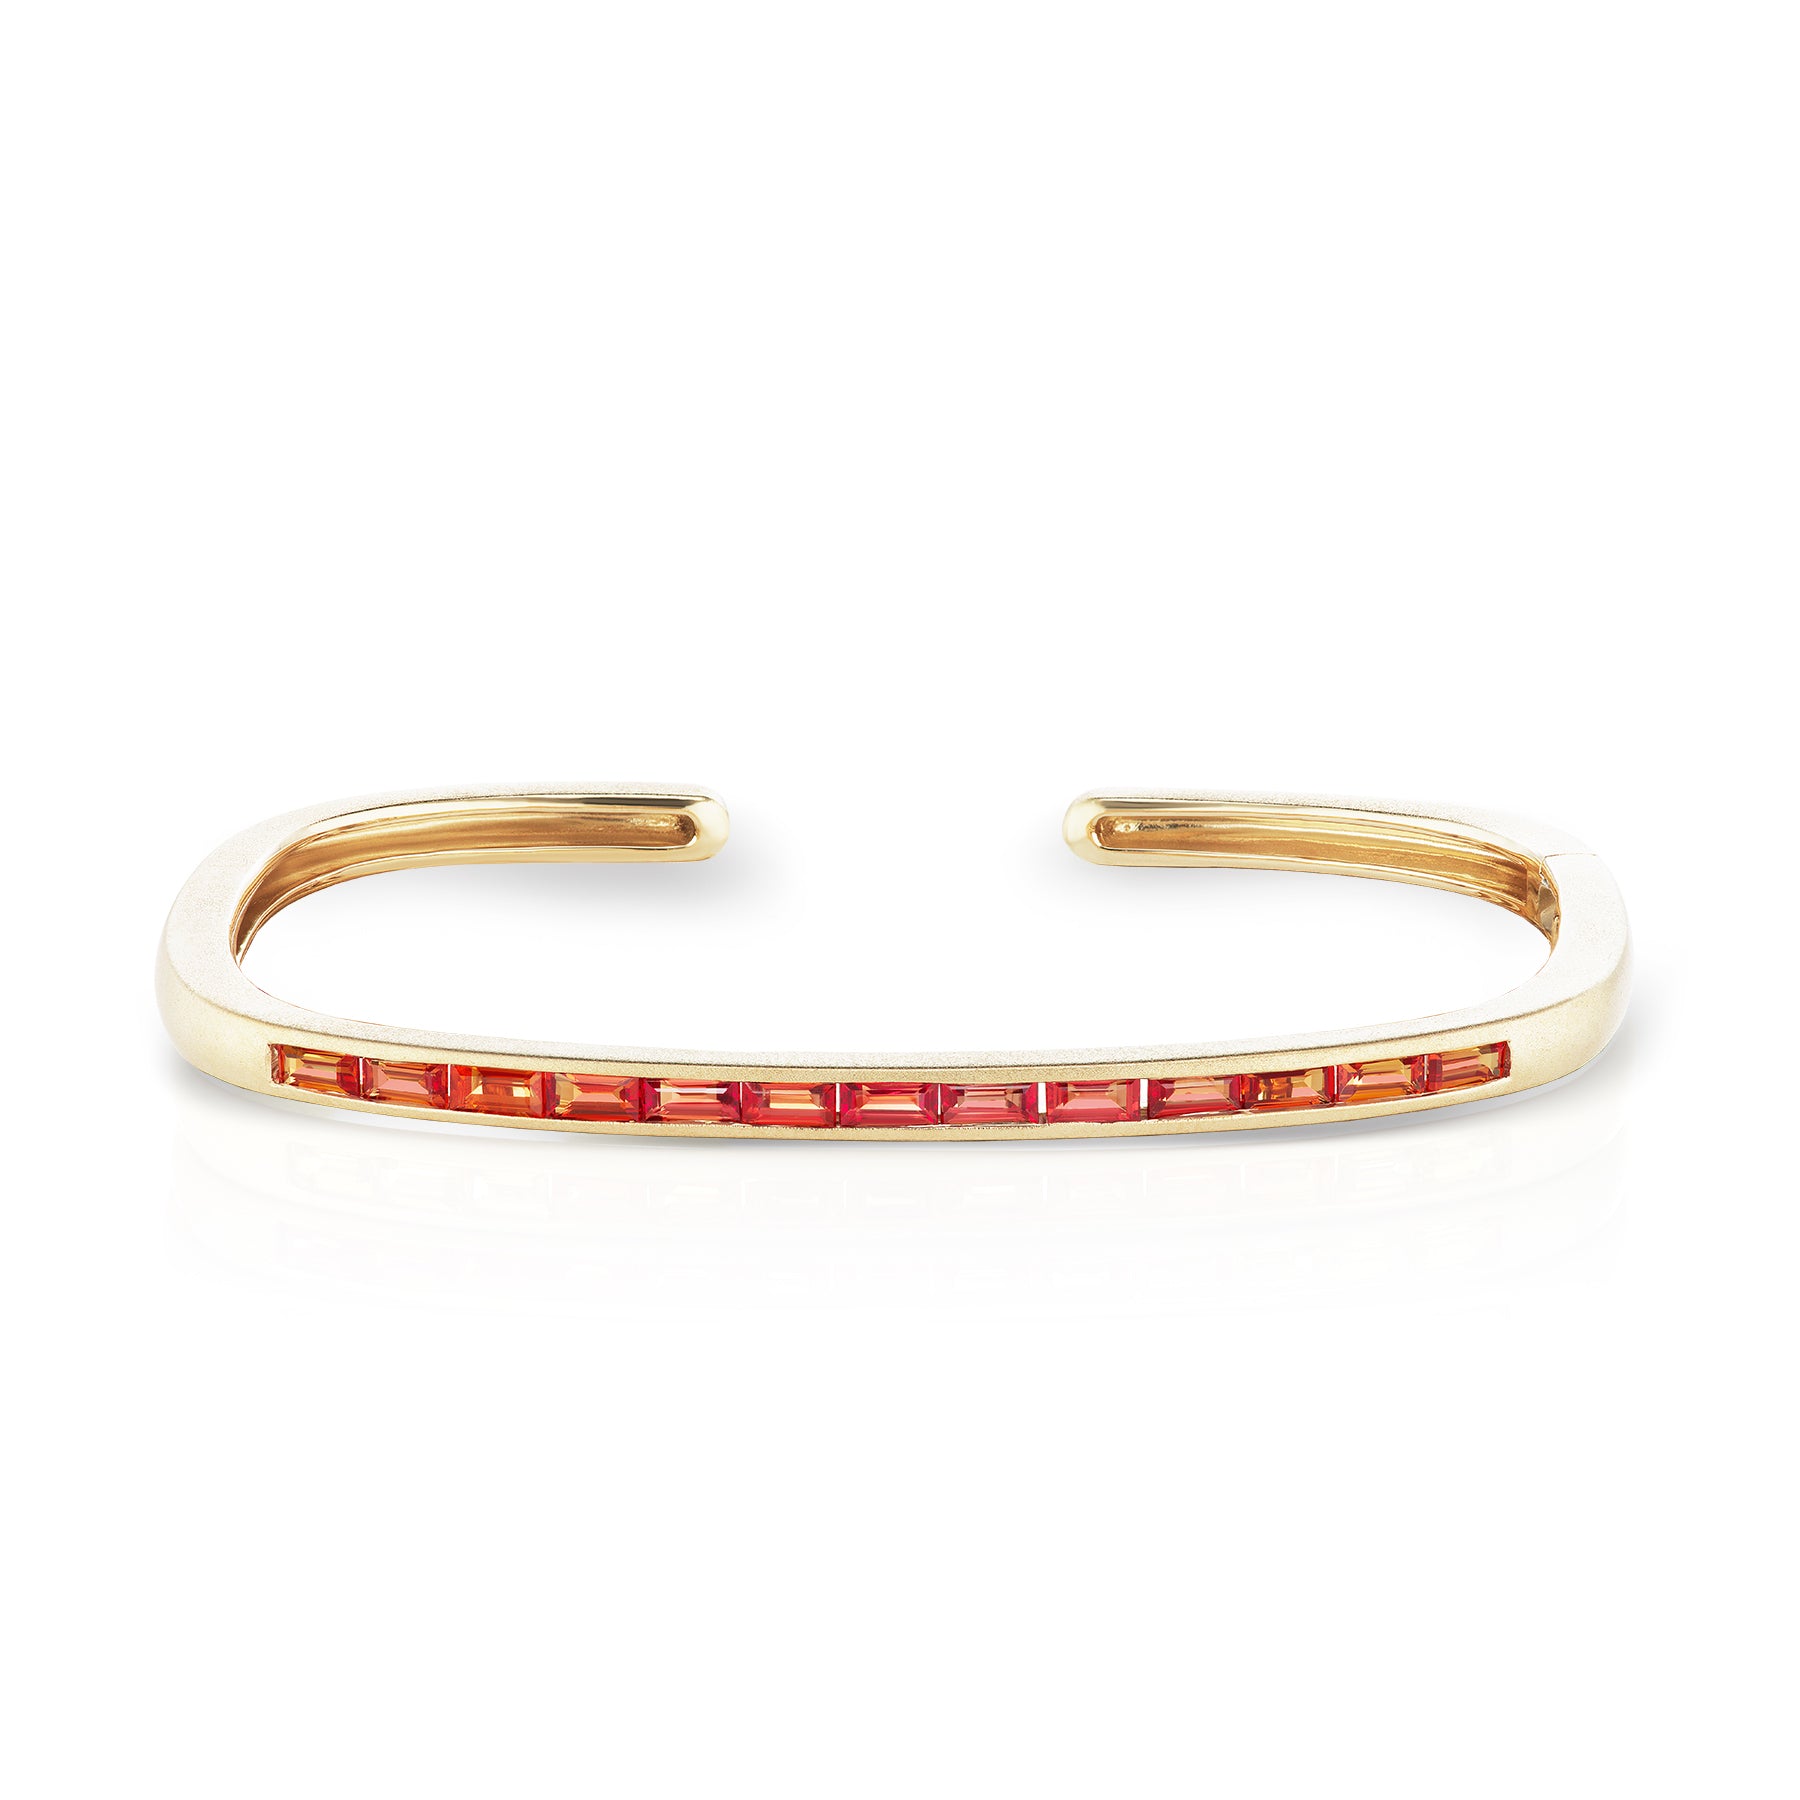 One of a Kind Slim Hinged Rectangular Cuff Bracelet with Red Orange Sapphire Baguettes